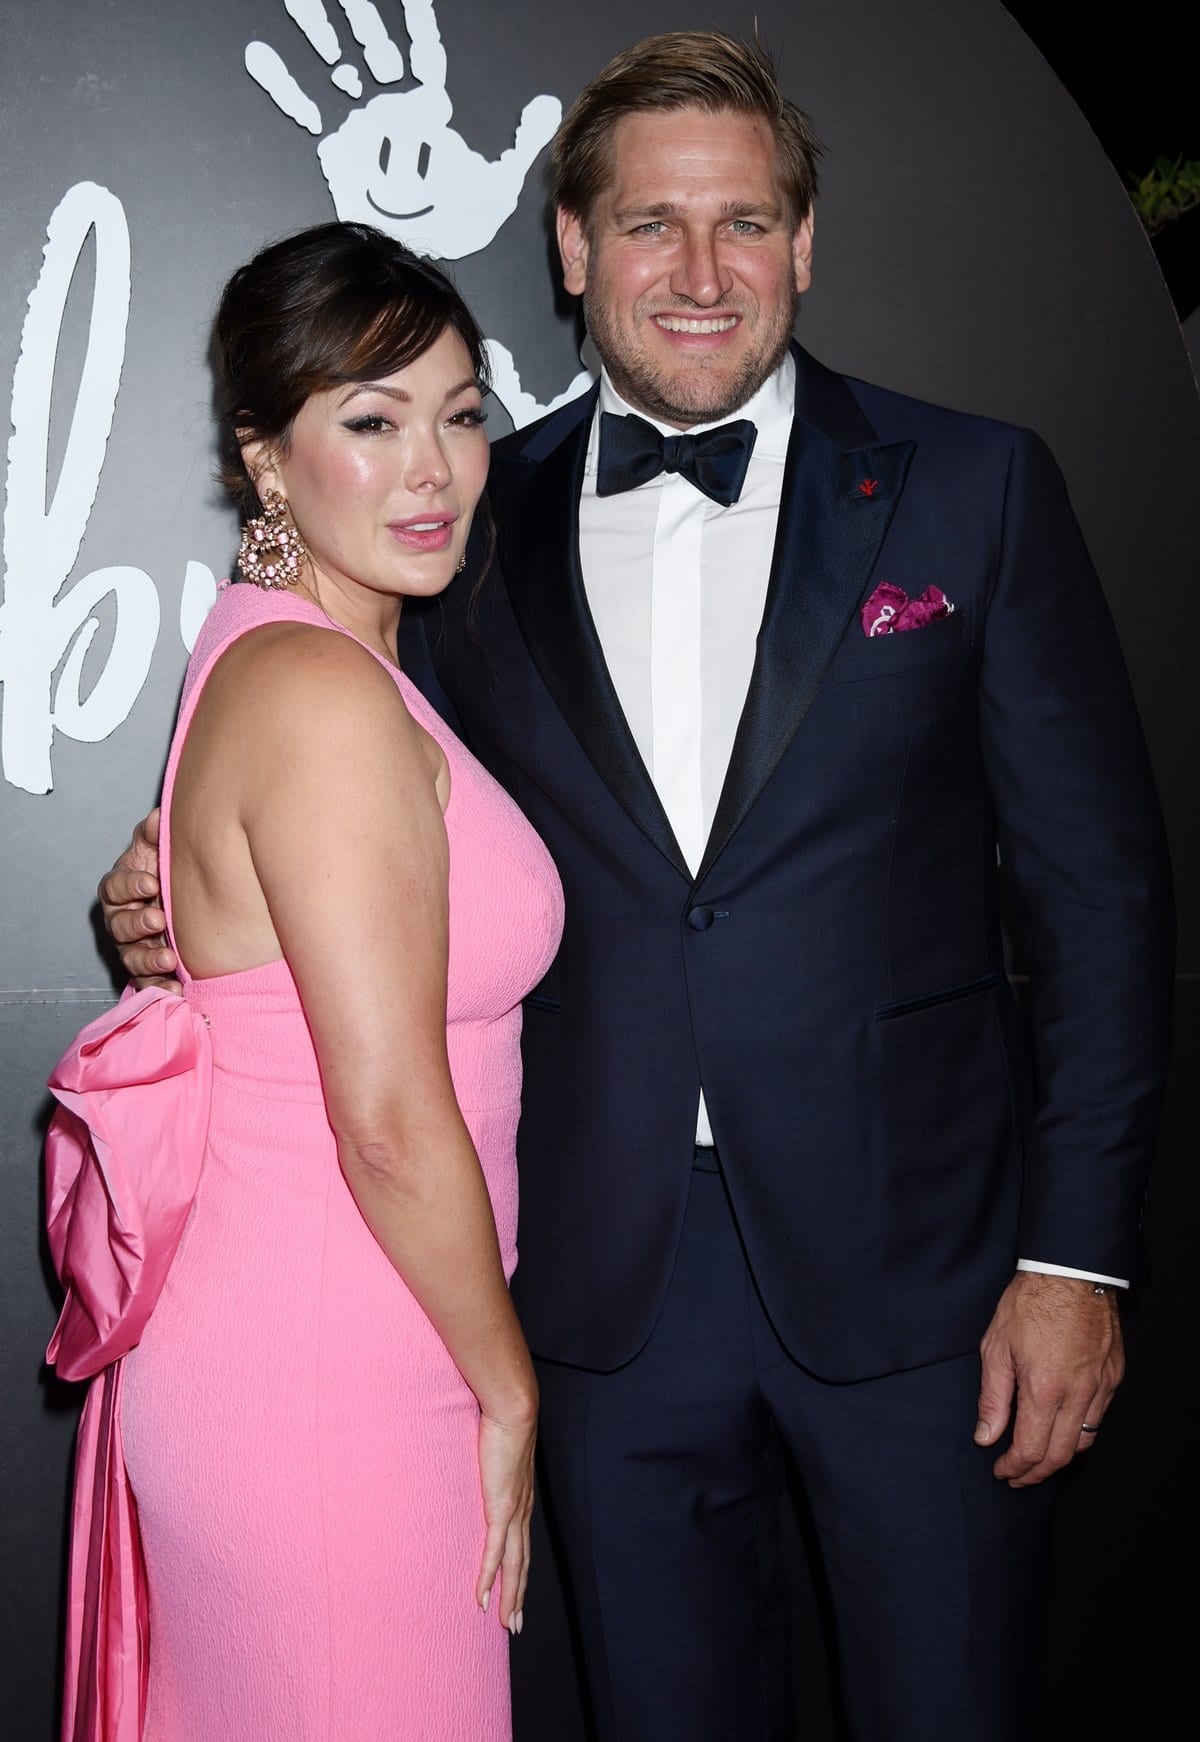 Lindsay Price with her second husband Curtis Stone attend AdoptTogether's Annual Baby Ball 2021 Gala